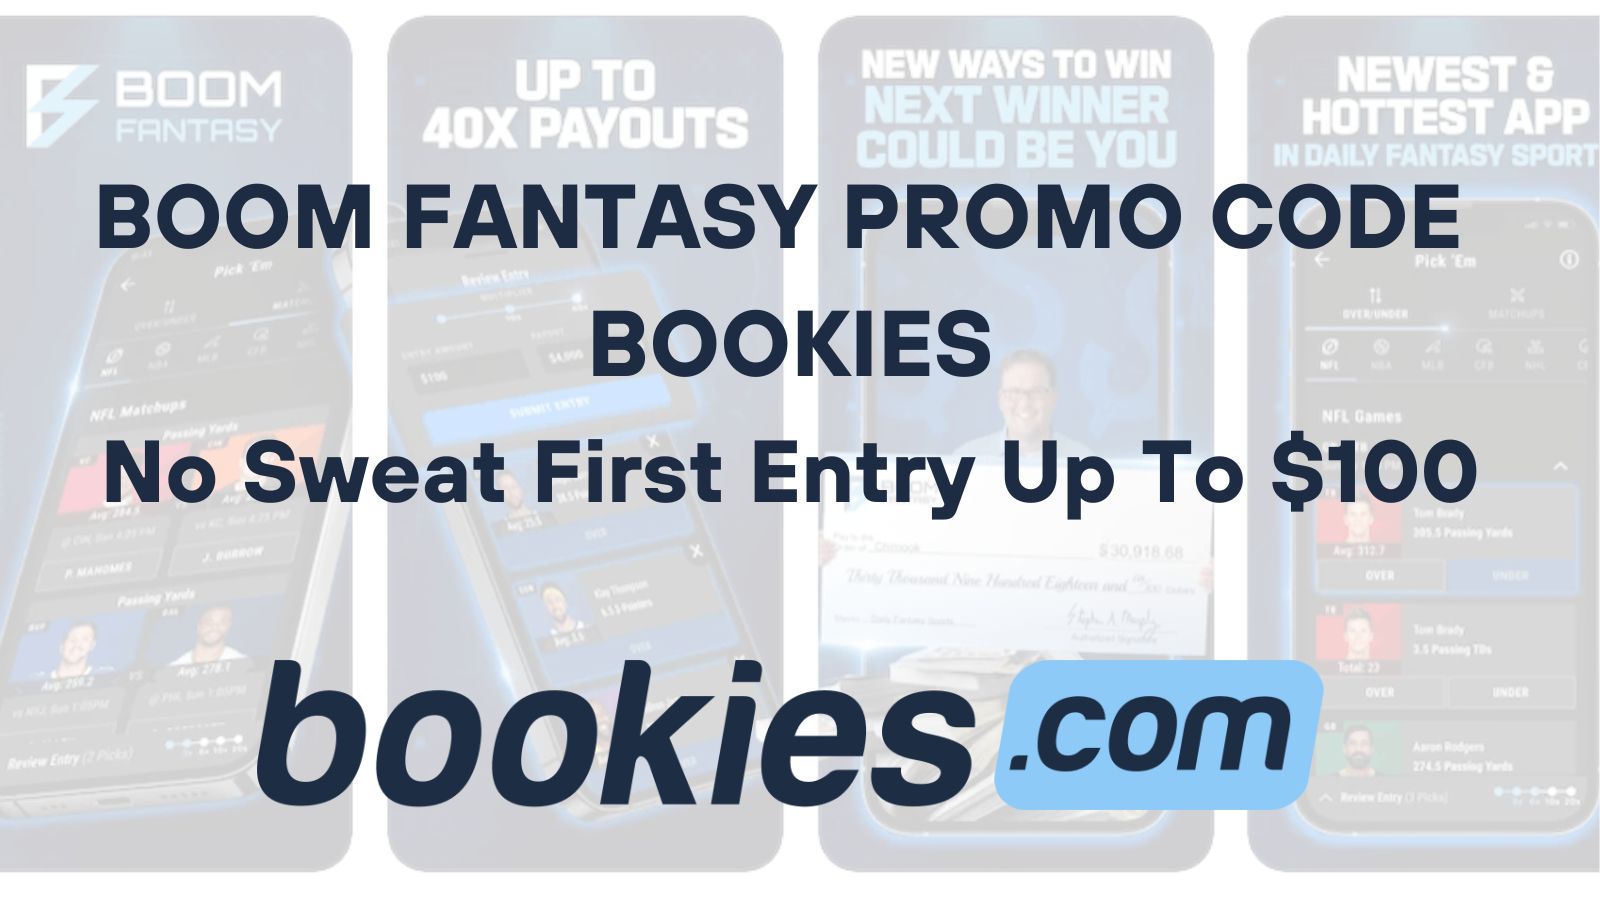 Boom Fantasy Promo Code BOOKIES Claim A No Sweat First Entry Up To